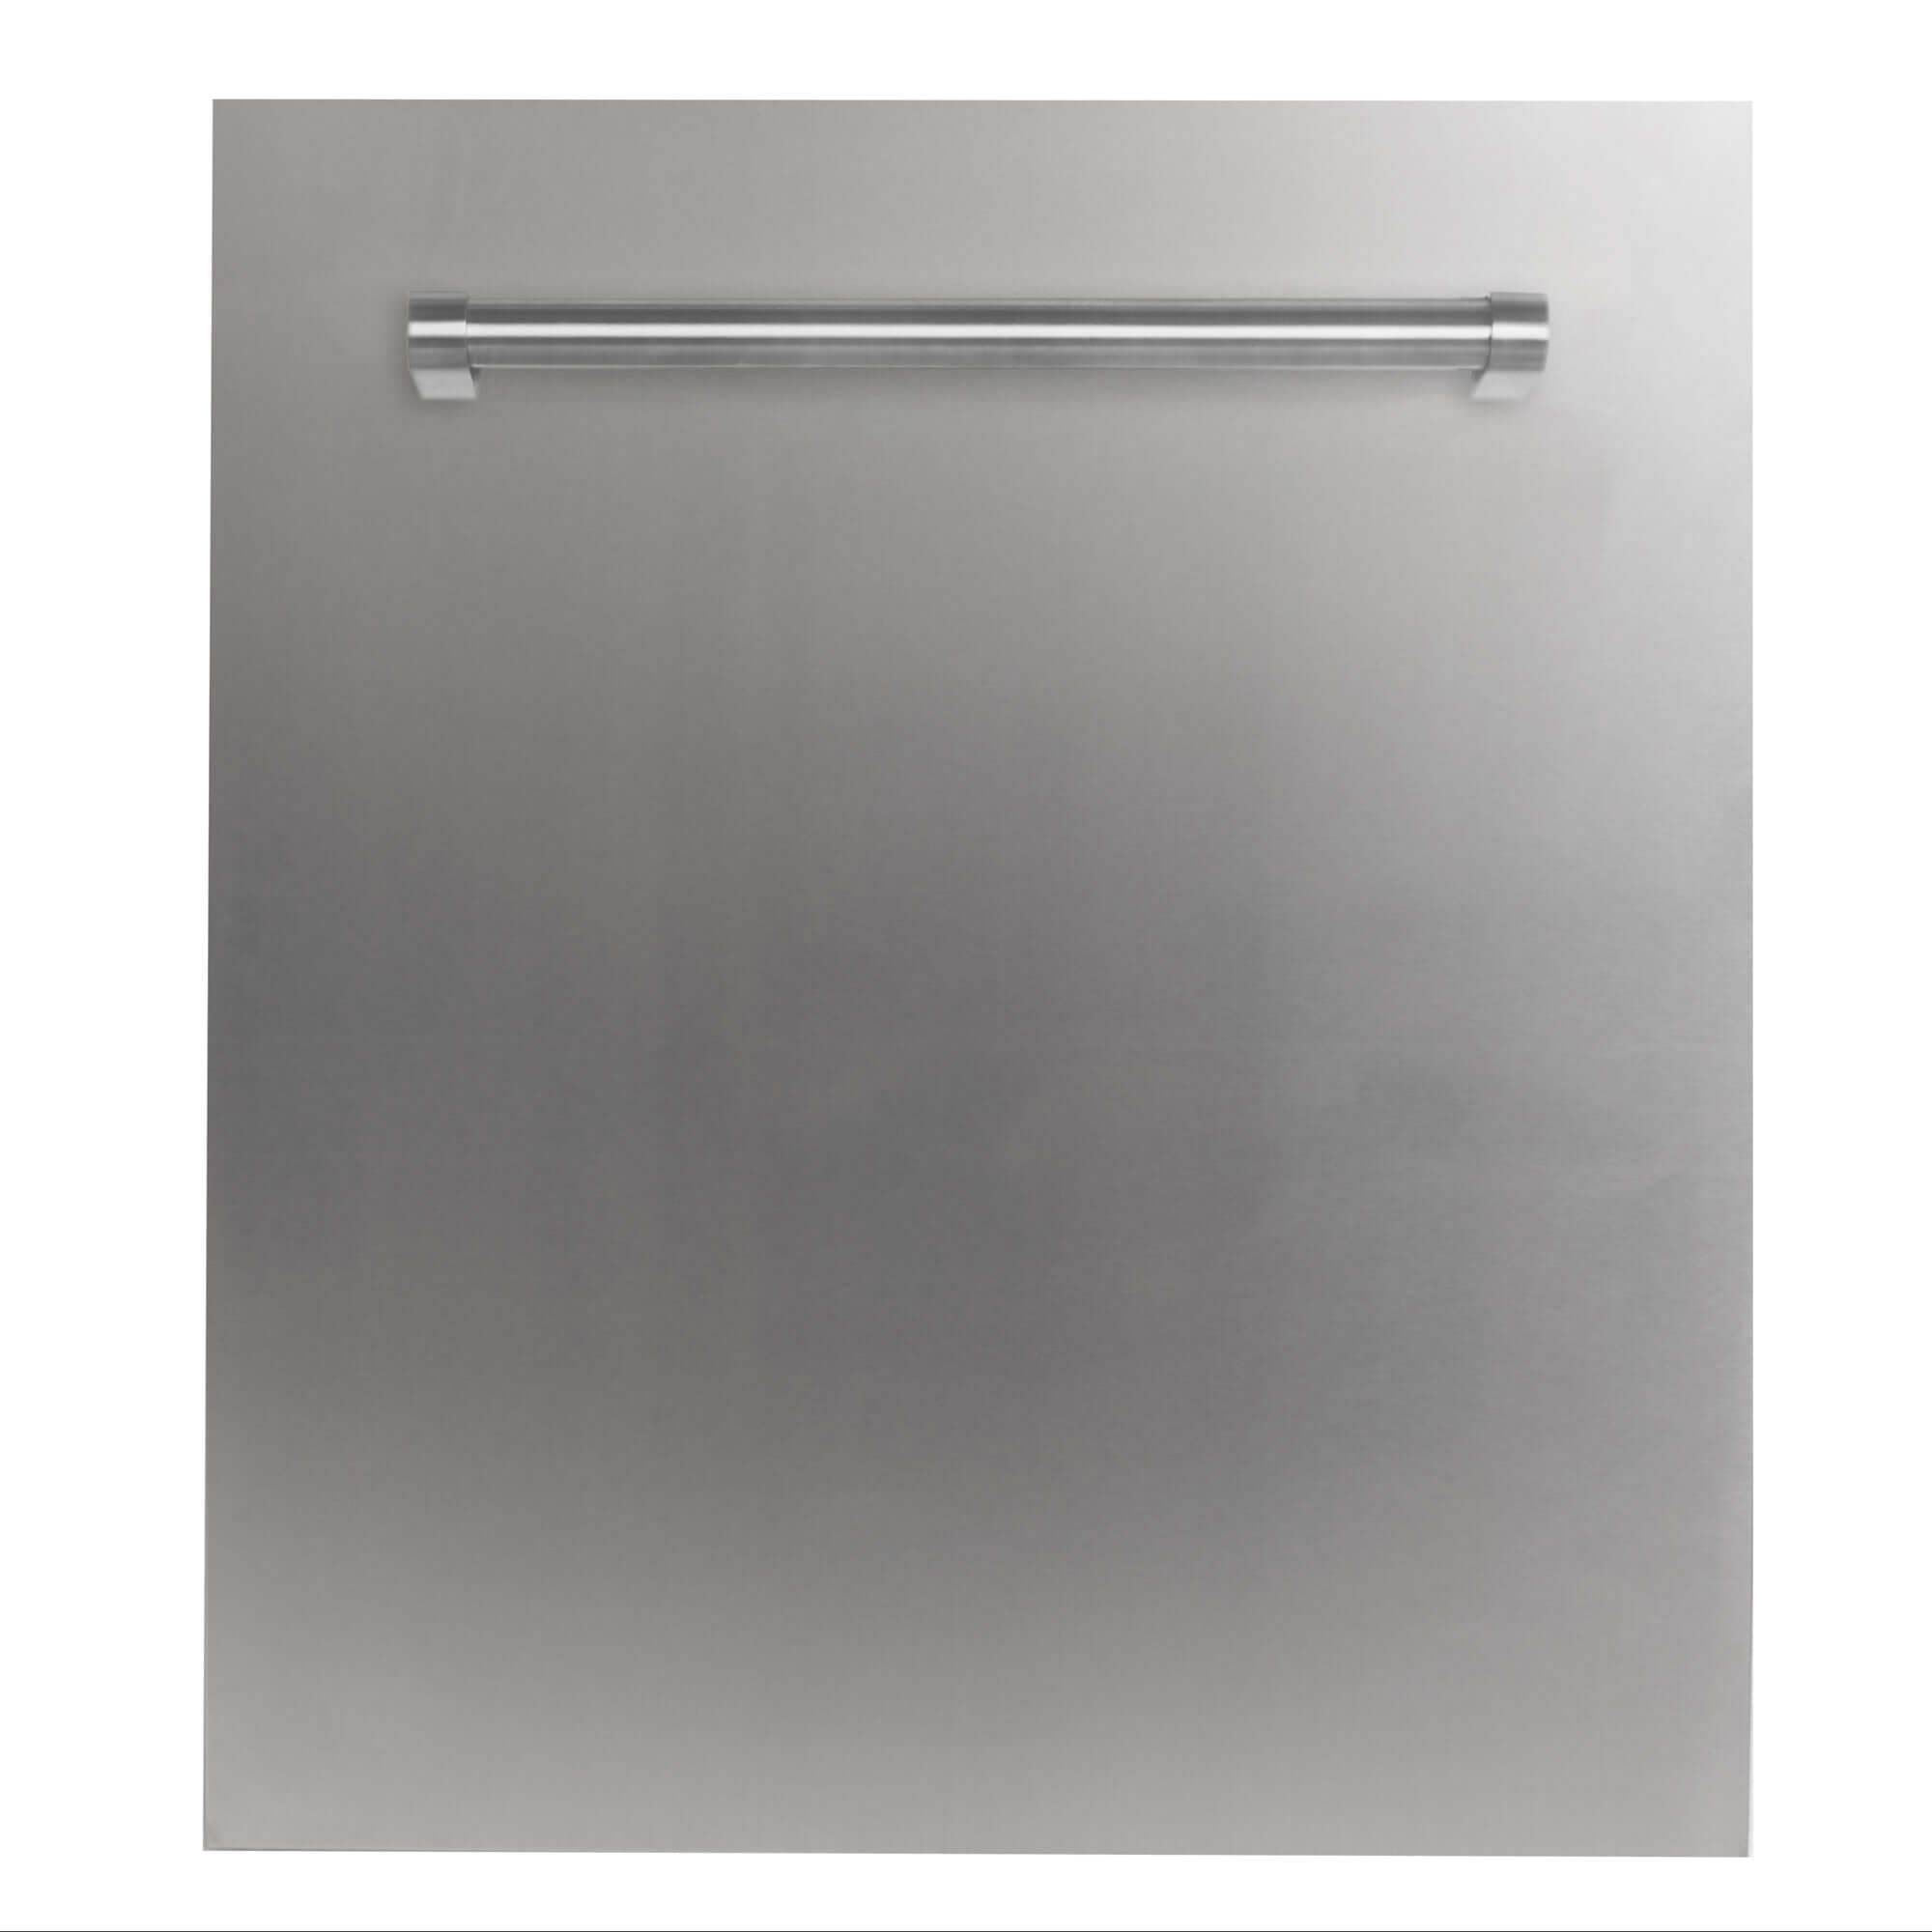 ZLINE 24 in. Dishwasher Panel in Stainless Steel with Traditional Handle